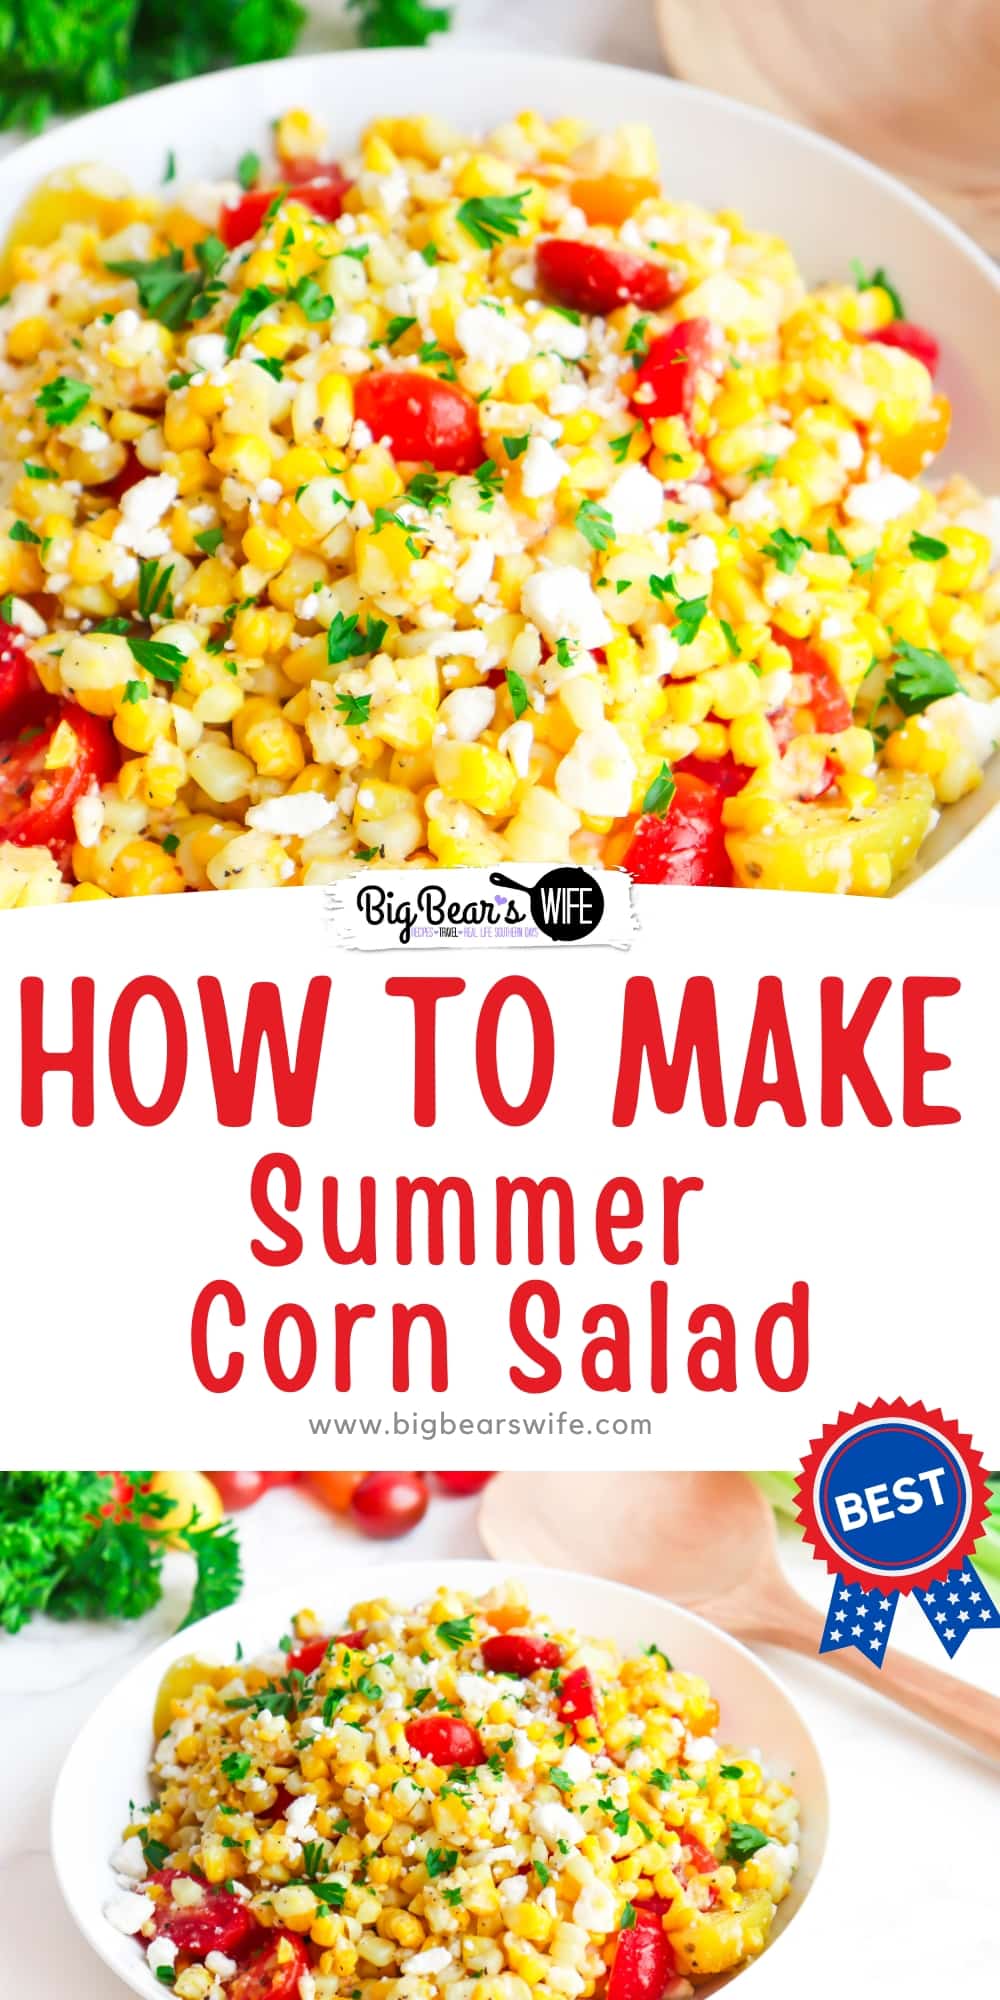 This Summer Corn Salad is great with fresh corn, frozen corn or canned corn! Packed with corn, tomatoes and feta cheese, this summer salad is going to be the perfect side dish for your next cookout or family dinner! via @bigbearswife